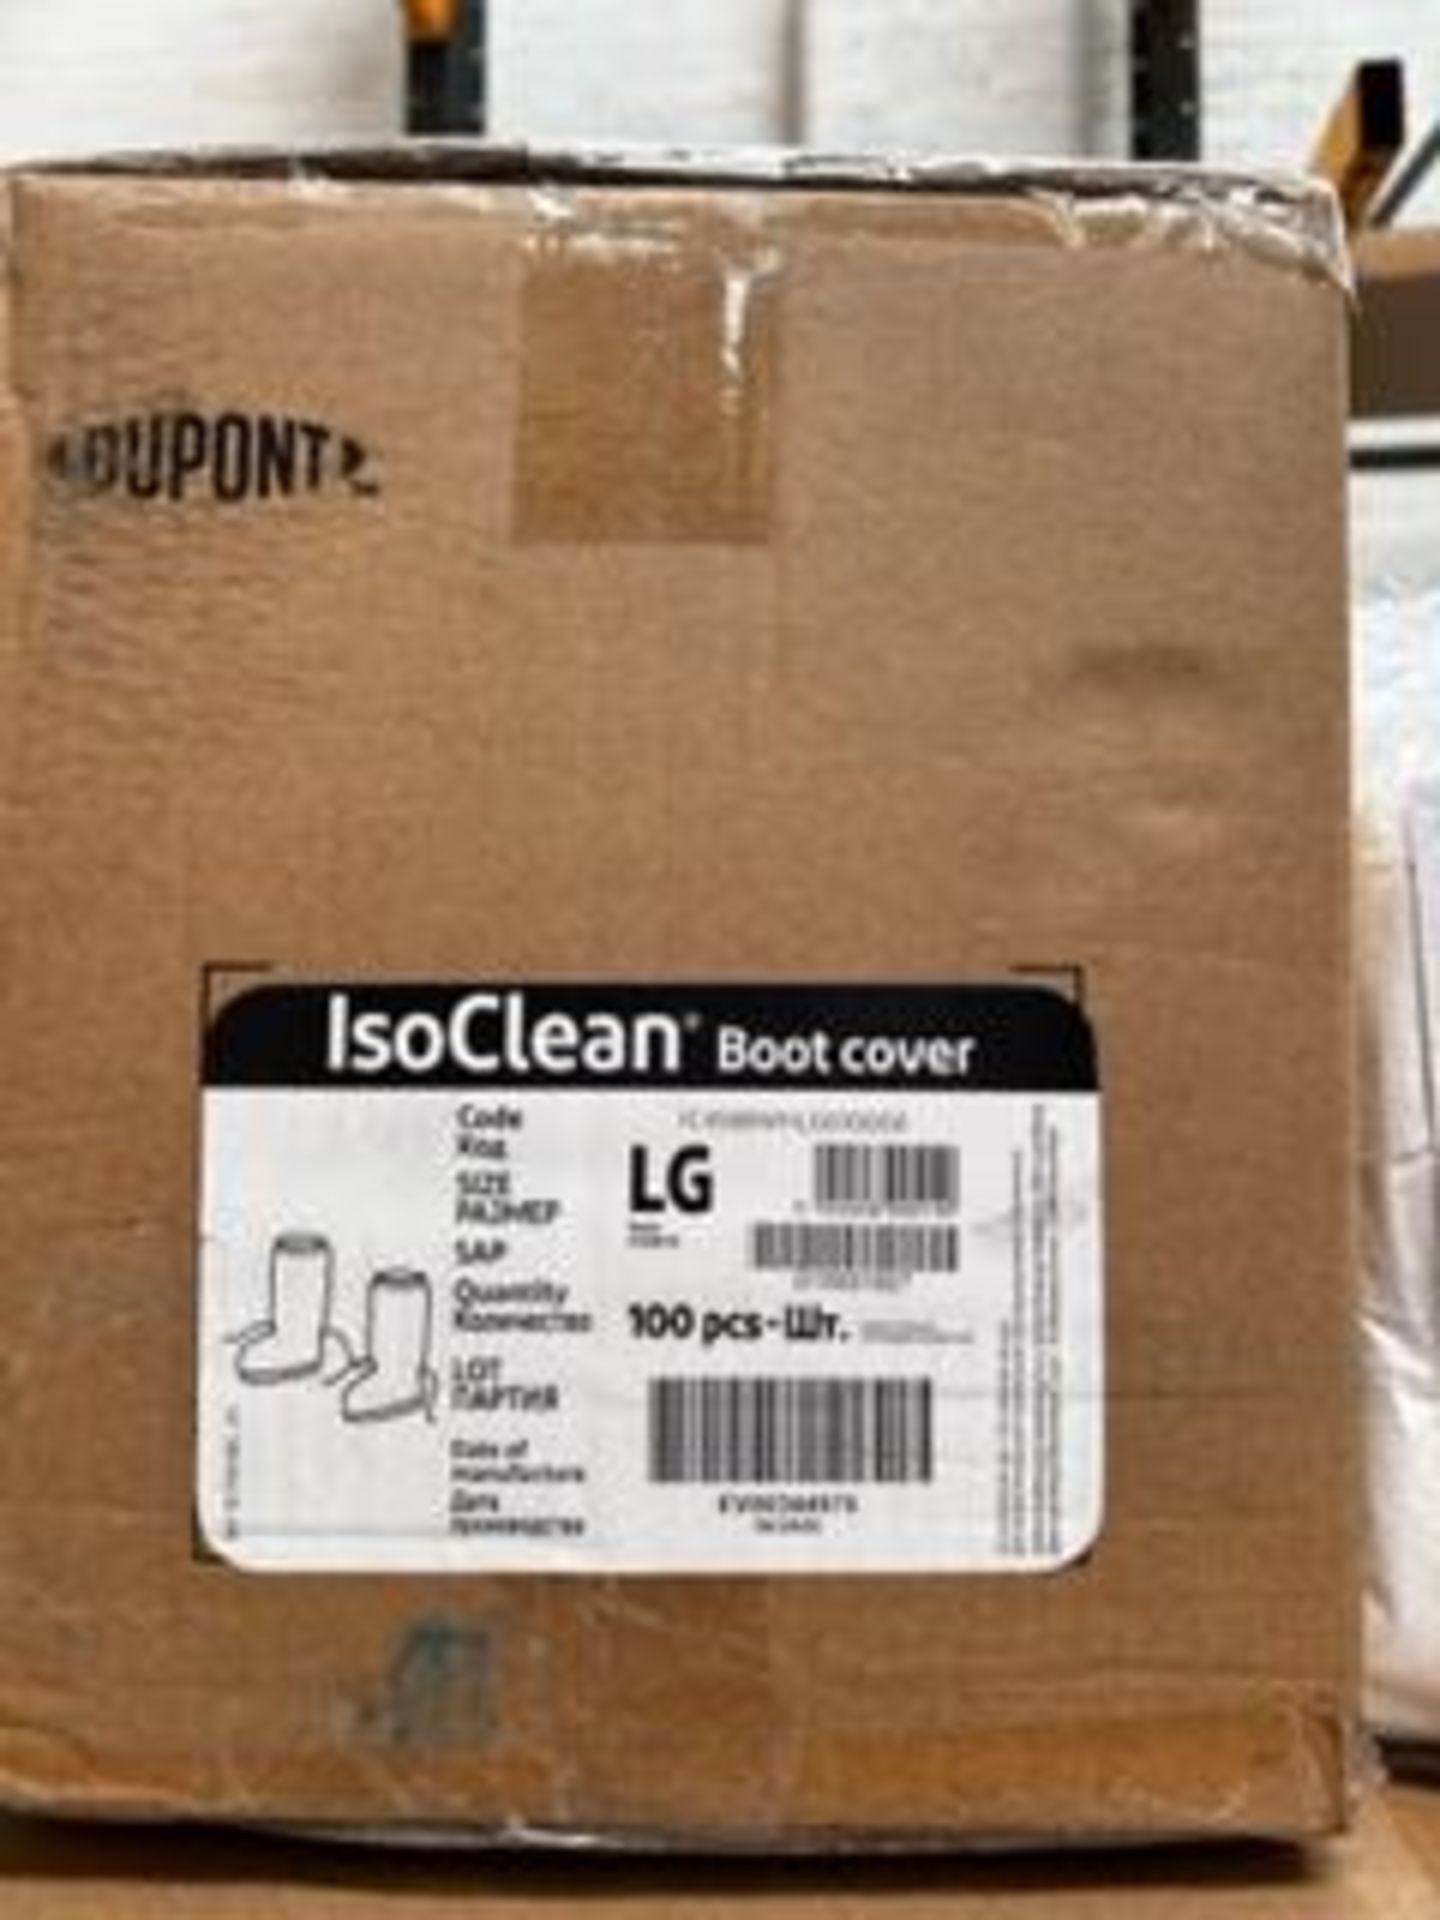 Iso Clean Boot Covers (72 Boxes Containing 50 Pairs) (vendors comments – new) Please read the - Image 3 of 3